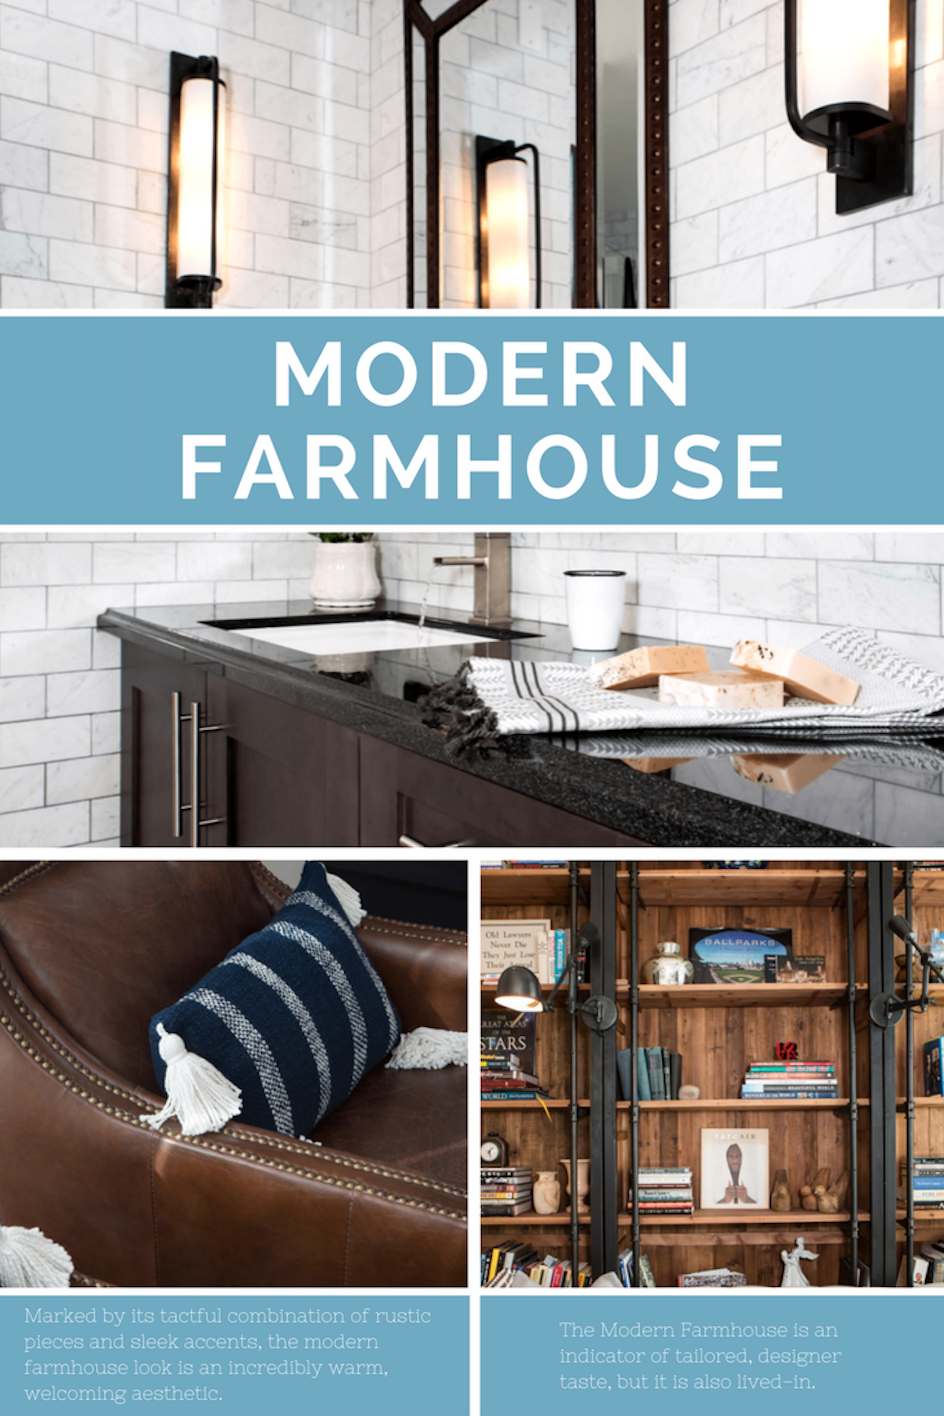 Marked by its tactful combination of rustic pieces and sleek accents, the modern farmhouse look is an incredibly warm, welcoming aesthetic. It is an indicator of tailored, designer taste, but it is also lived-in.